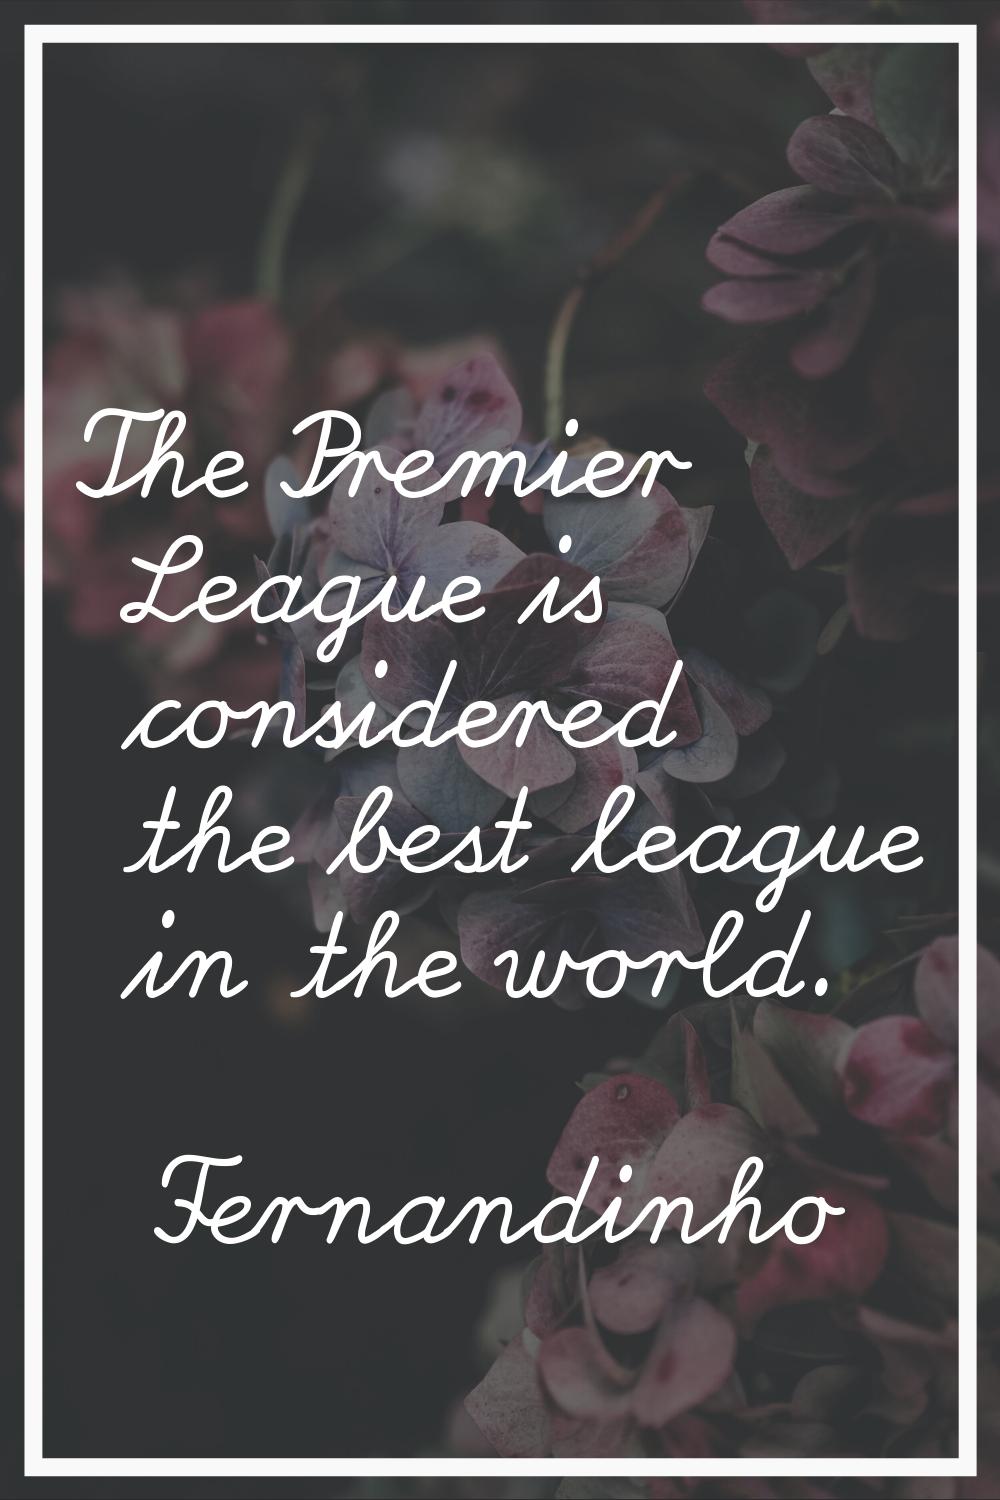 The Premier League is considered the best league in the world.